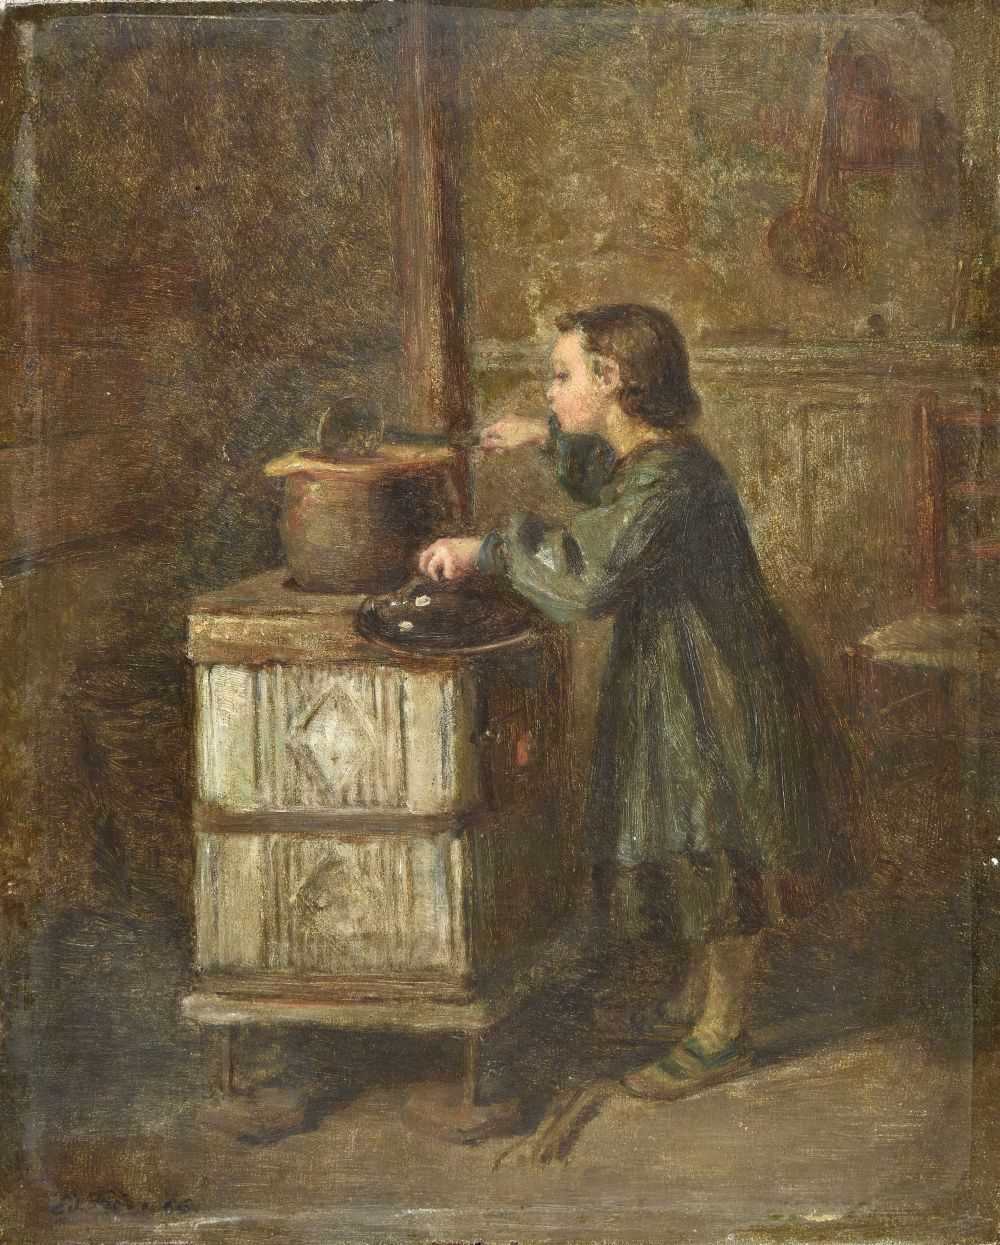 Lot 448 - Frere (Edouard, 1819-1886). Girl with Cooking Pot at the Stove, 1866